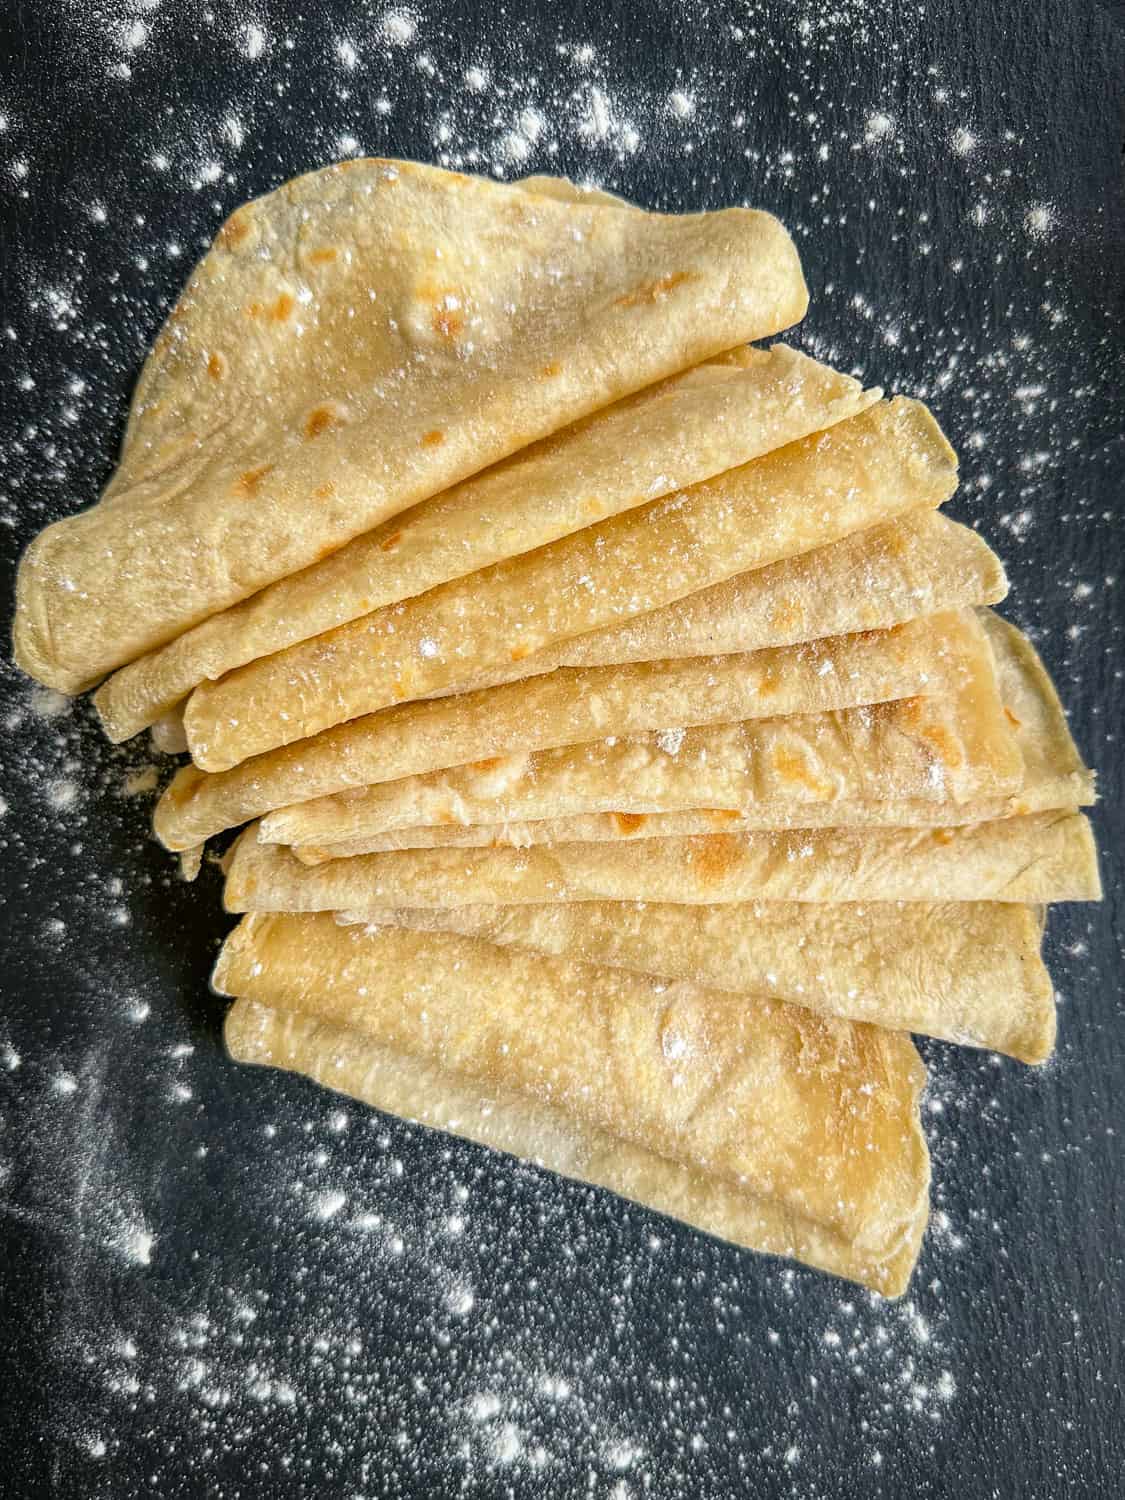 cooked soft flour tortillas on black tray